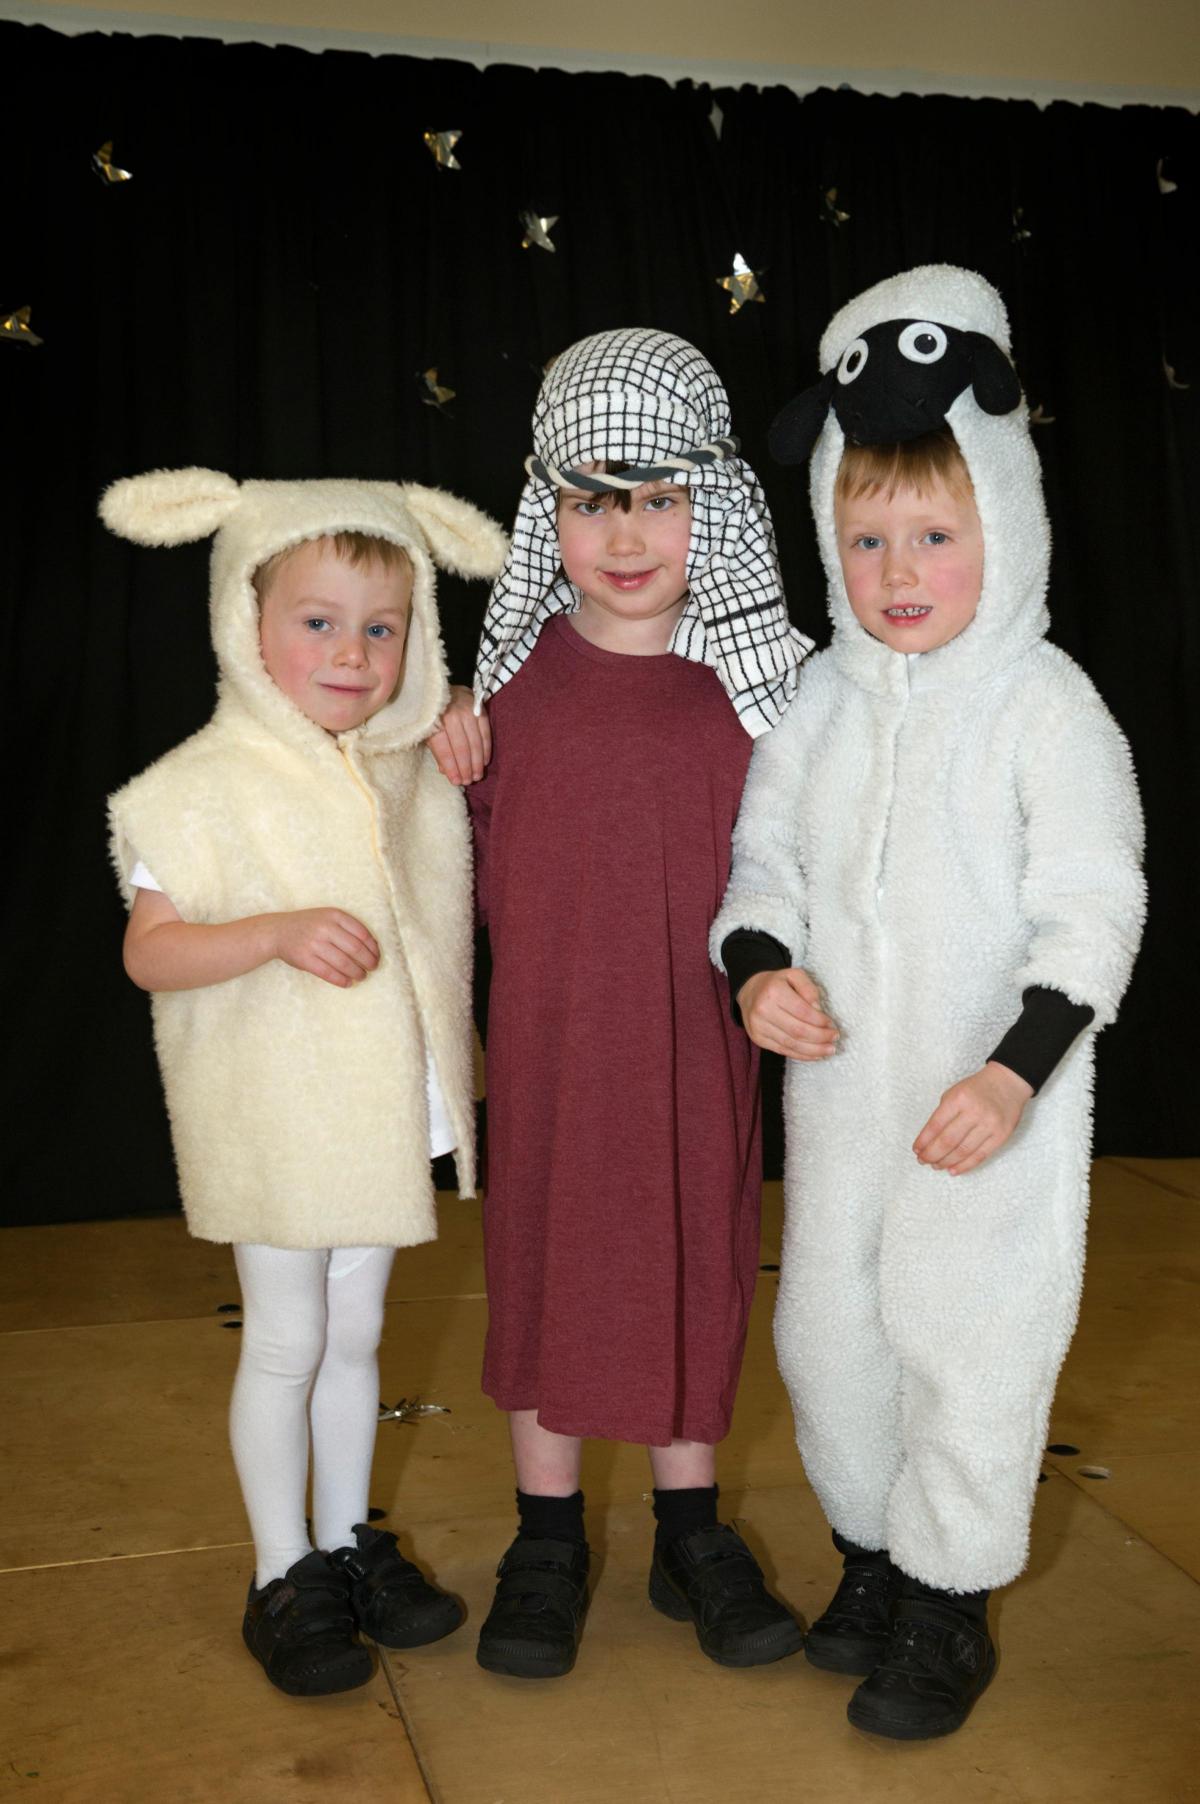 Pictures by Sam Cook. 25% off nativity photo prints,  just add echosave25 at the checkout